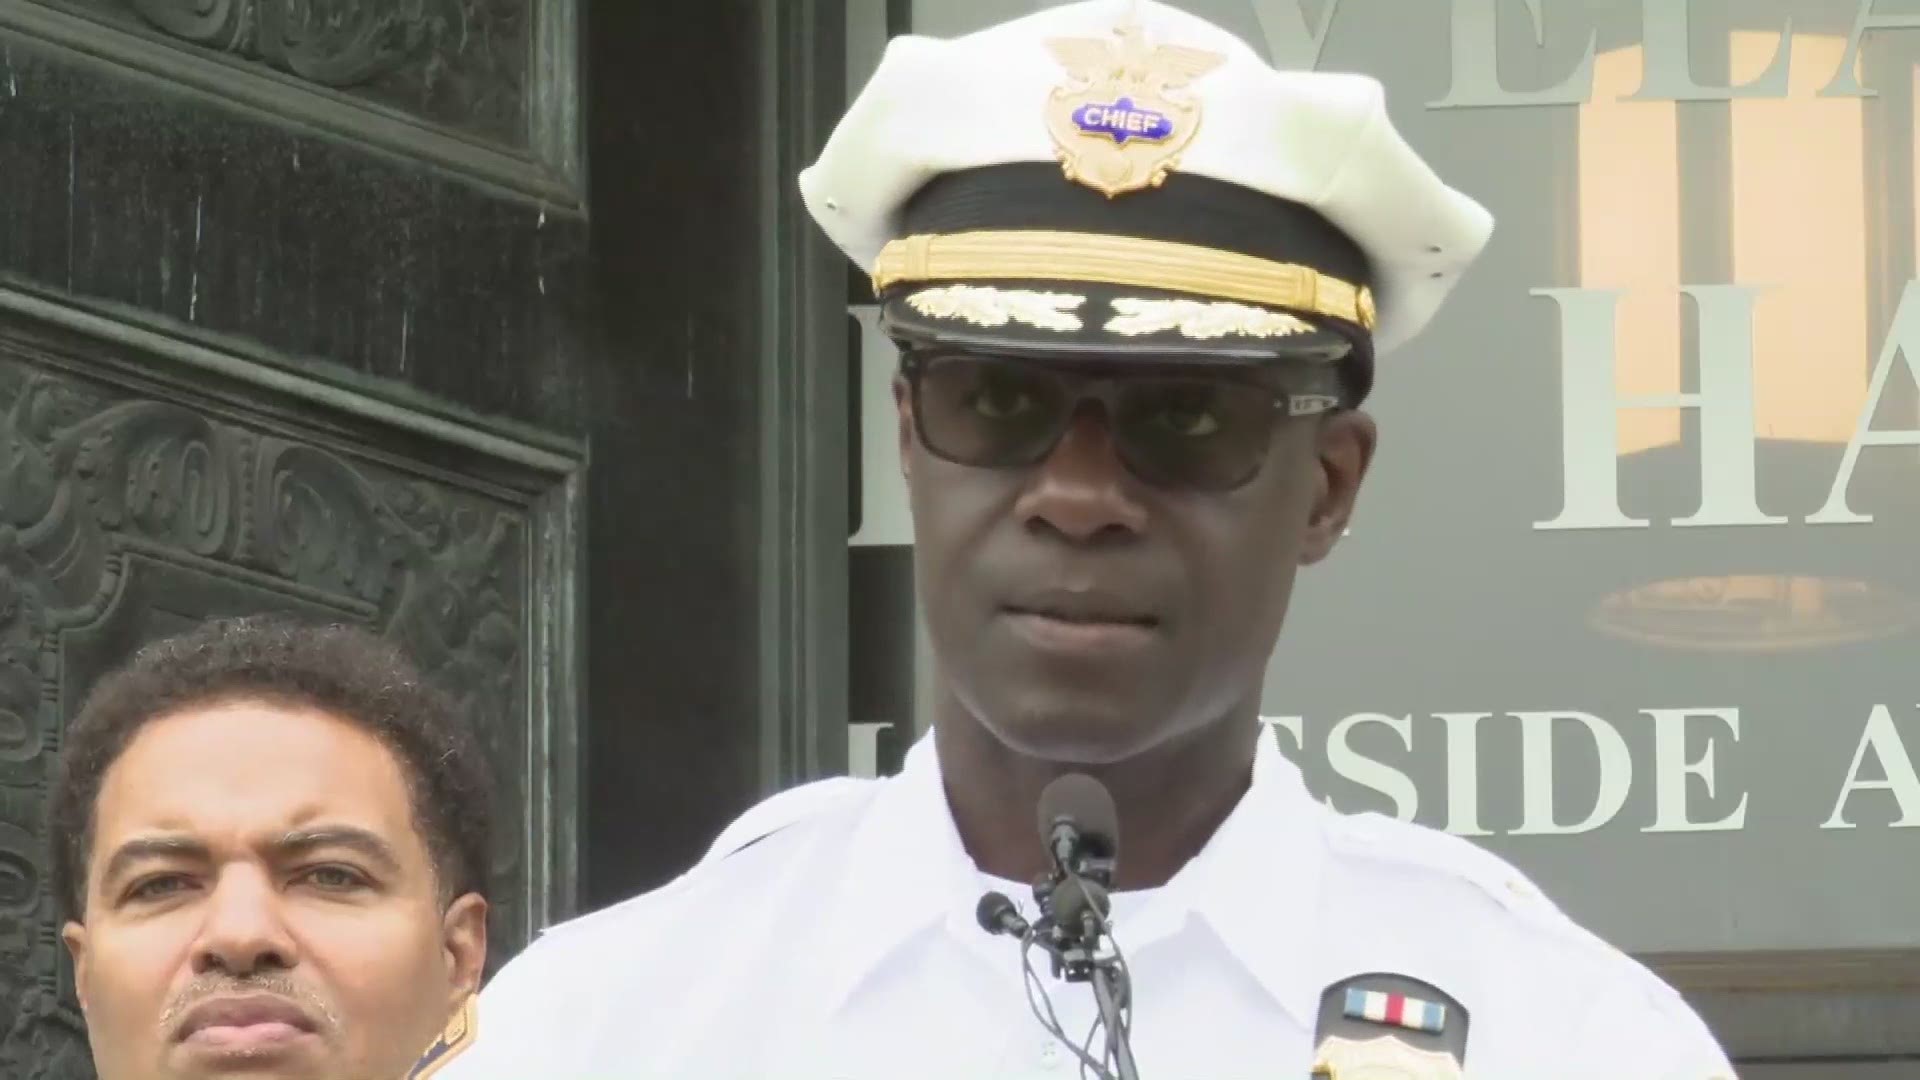 Oct. 7, 2019: Cleveland authorities joined together with an urgent plea to the community to report anything they may know about unsolved violent crimes in the city.